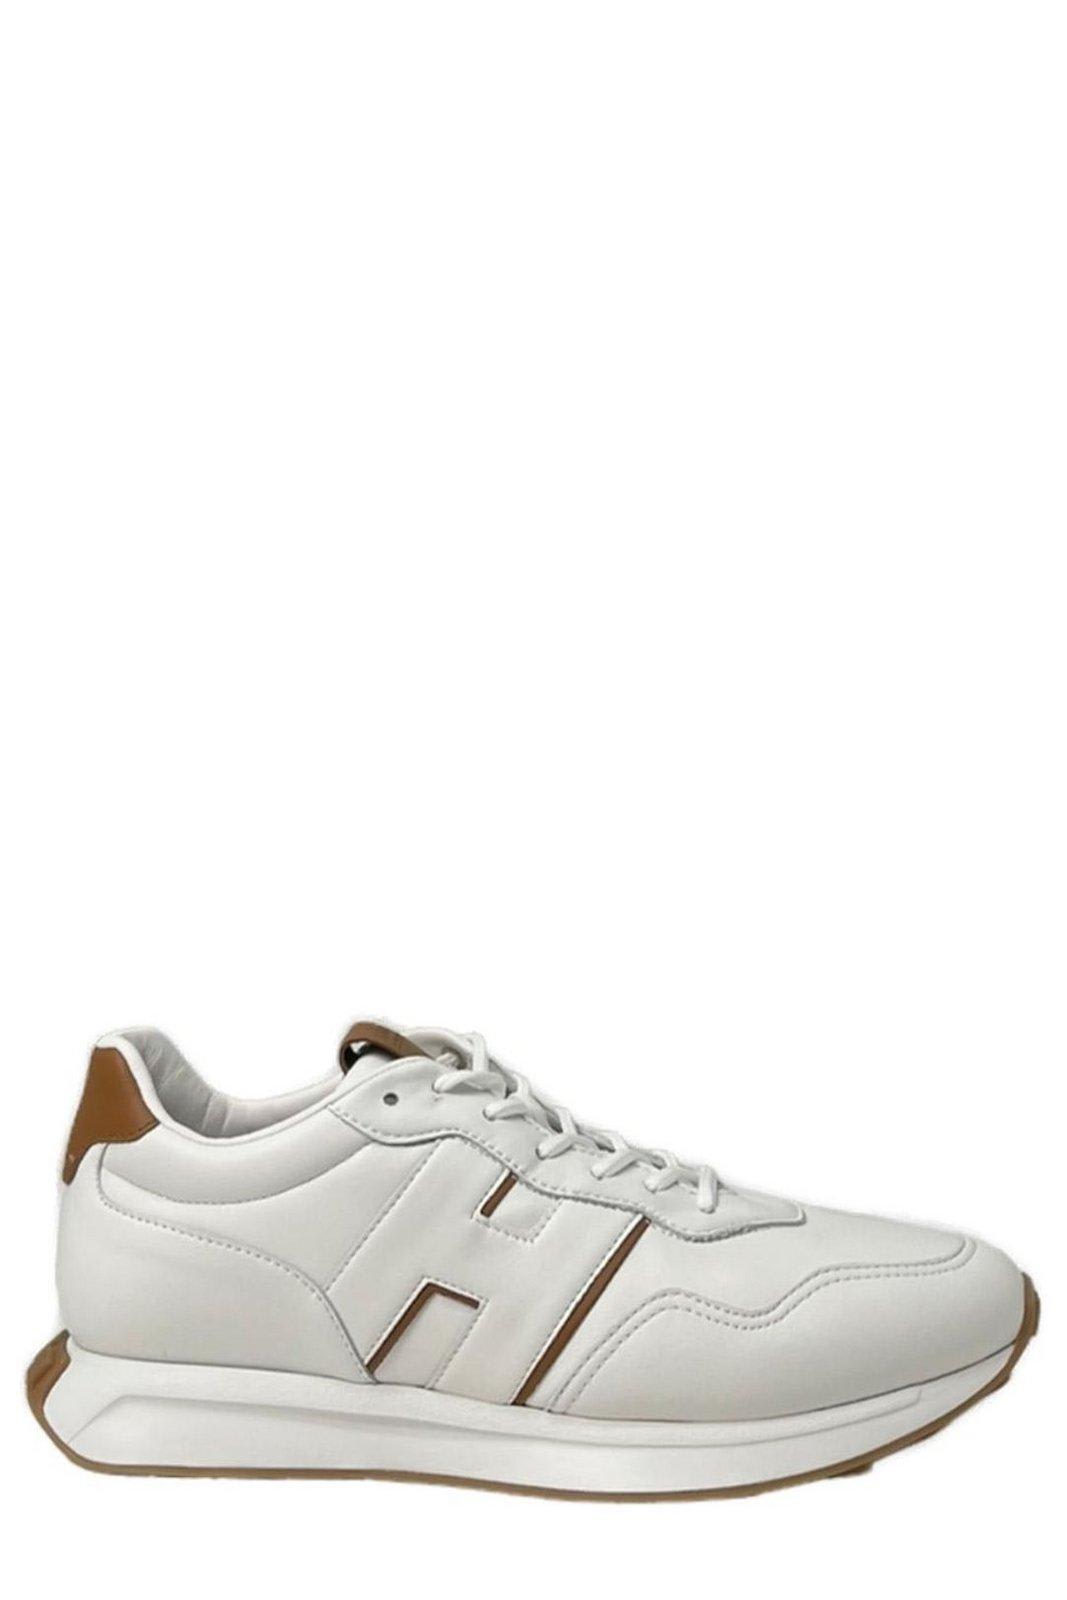 H601 Leather Sneakers